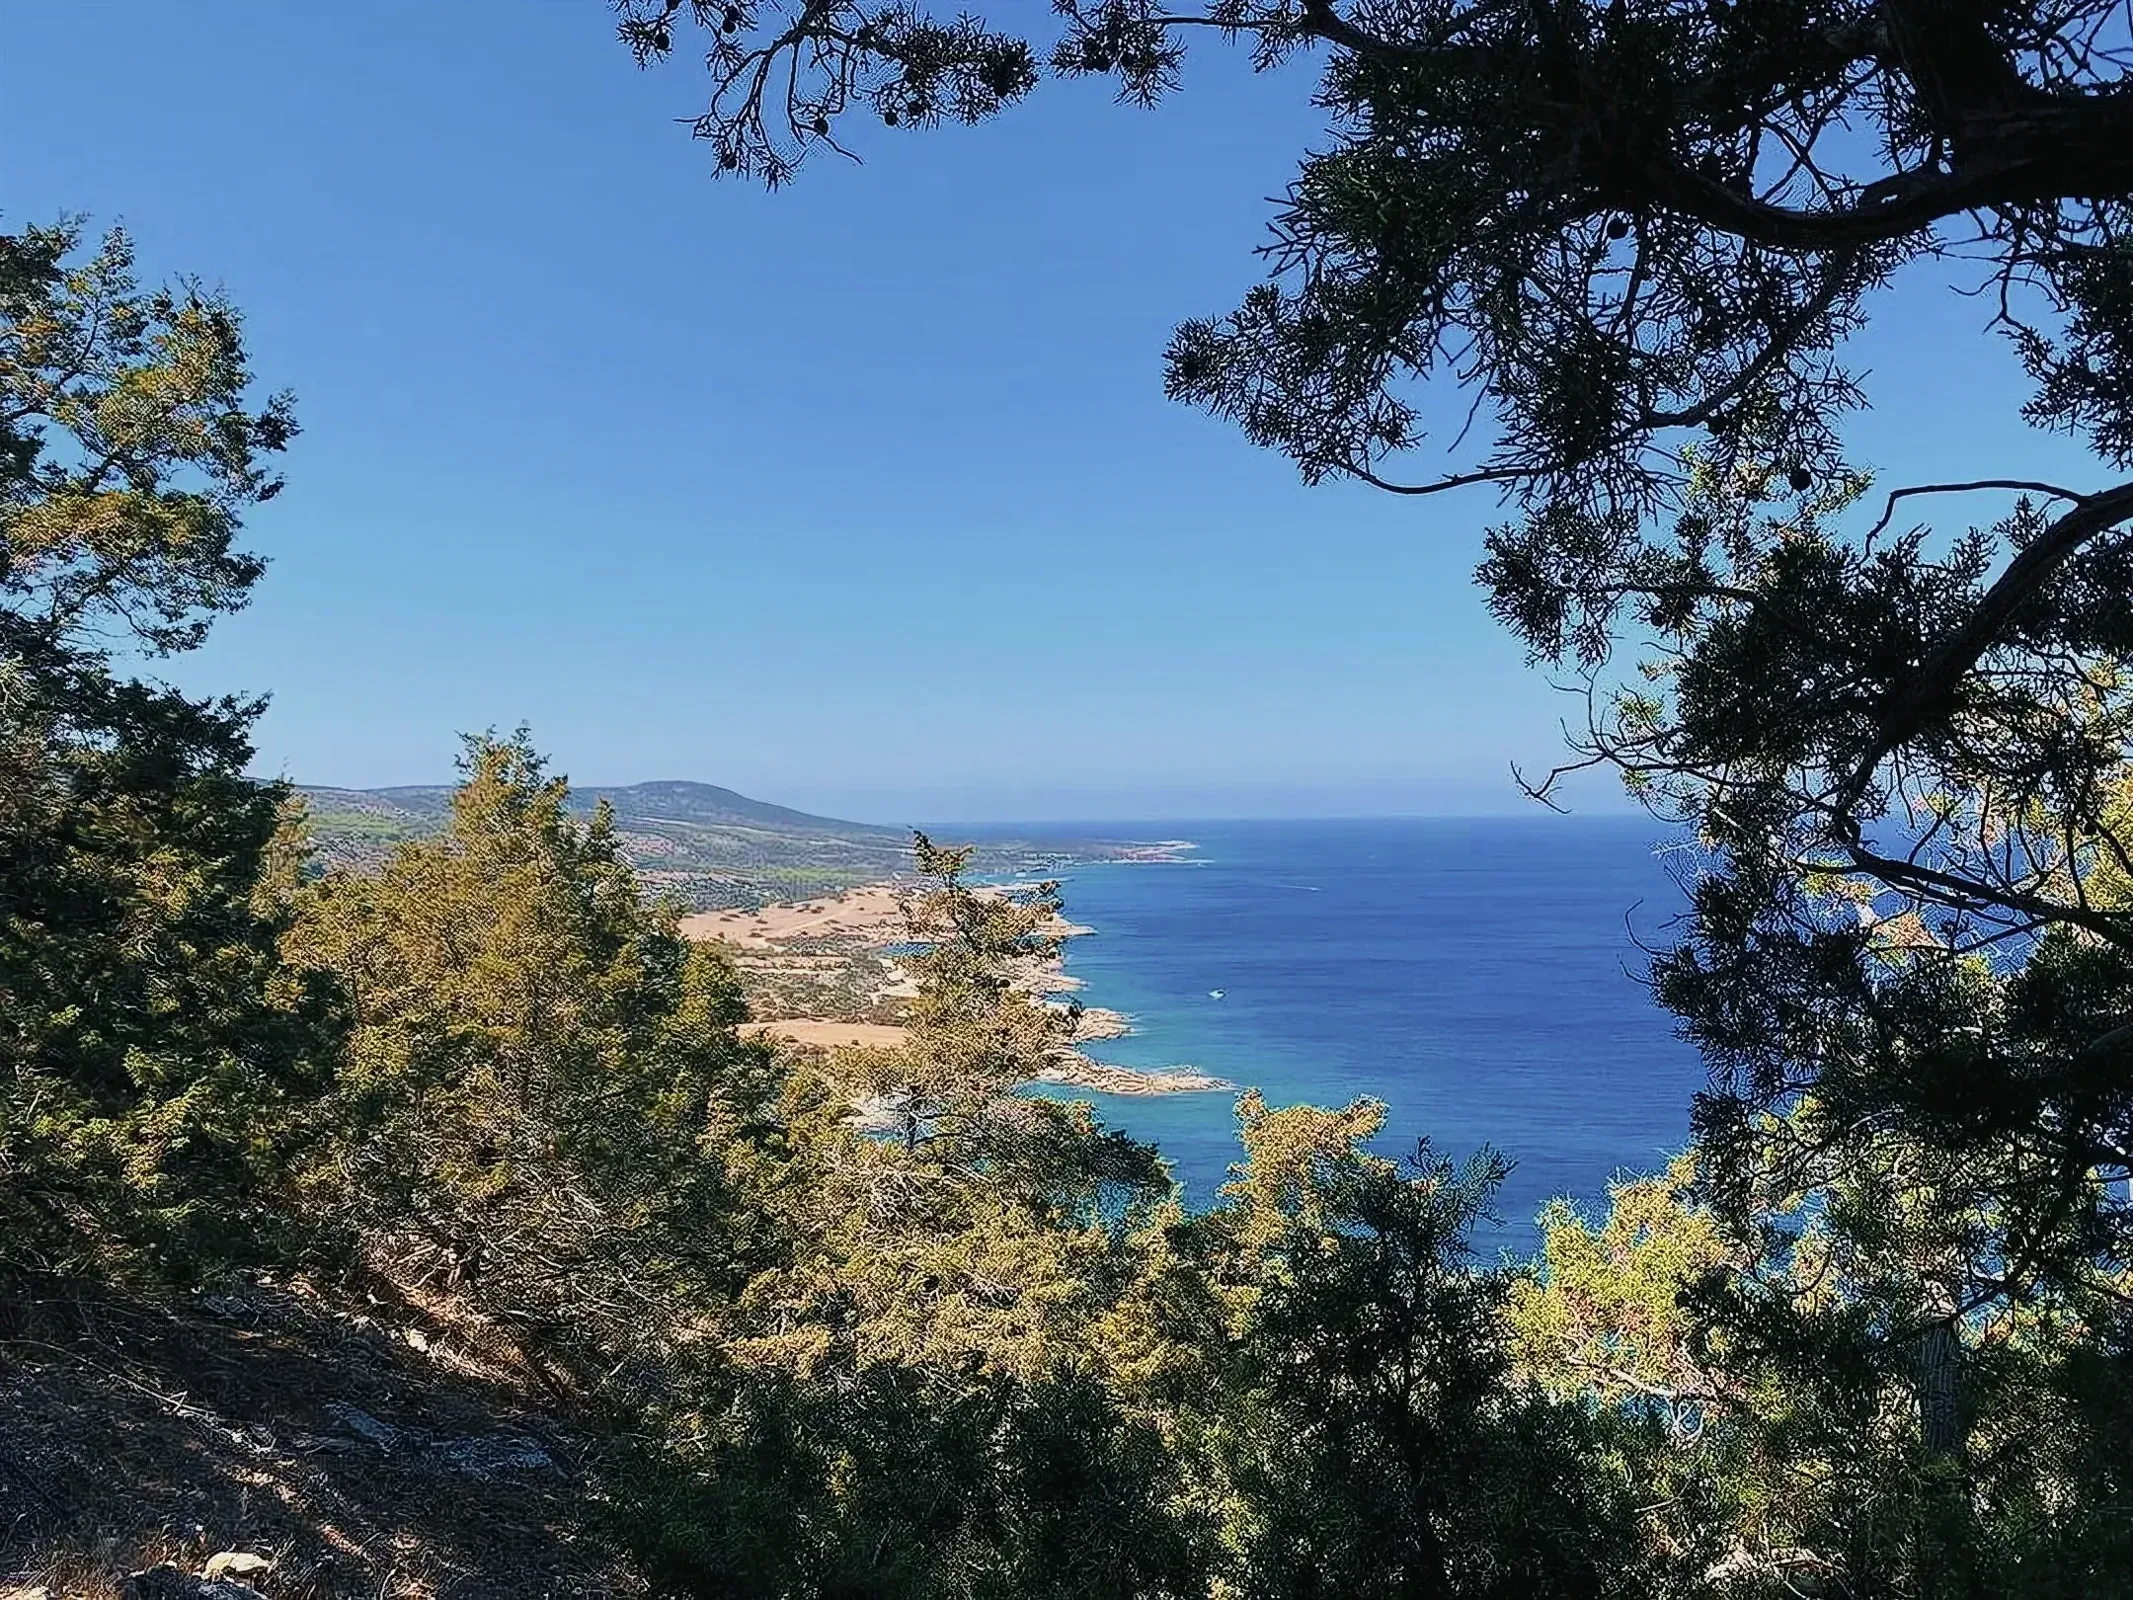 Stunning vista of Akamas National Park with a serene body of water and lush trees